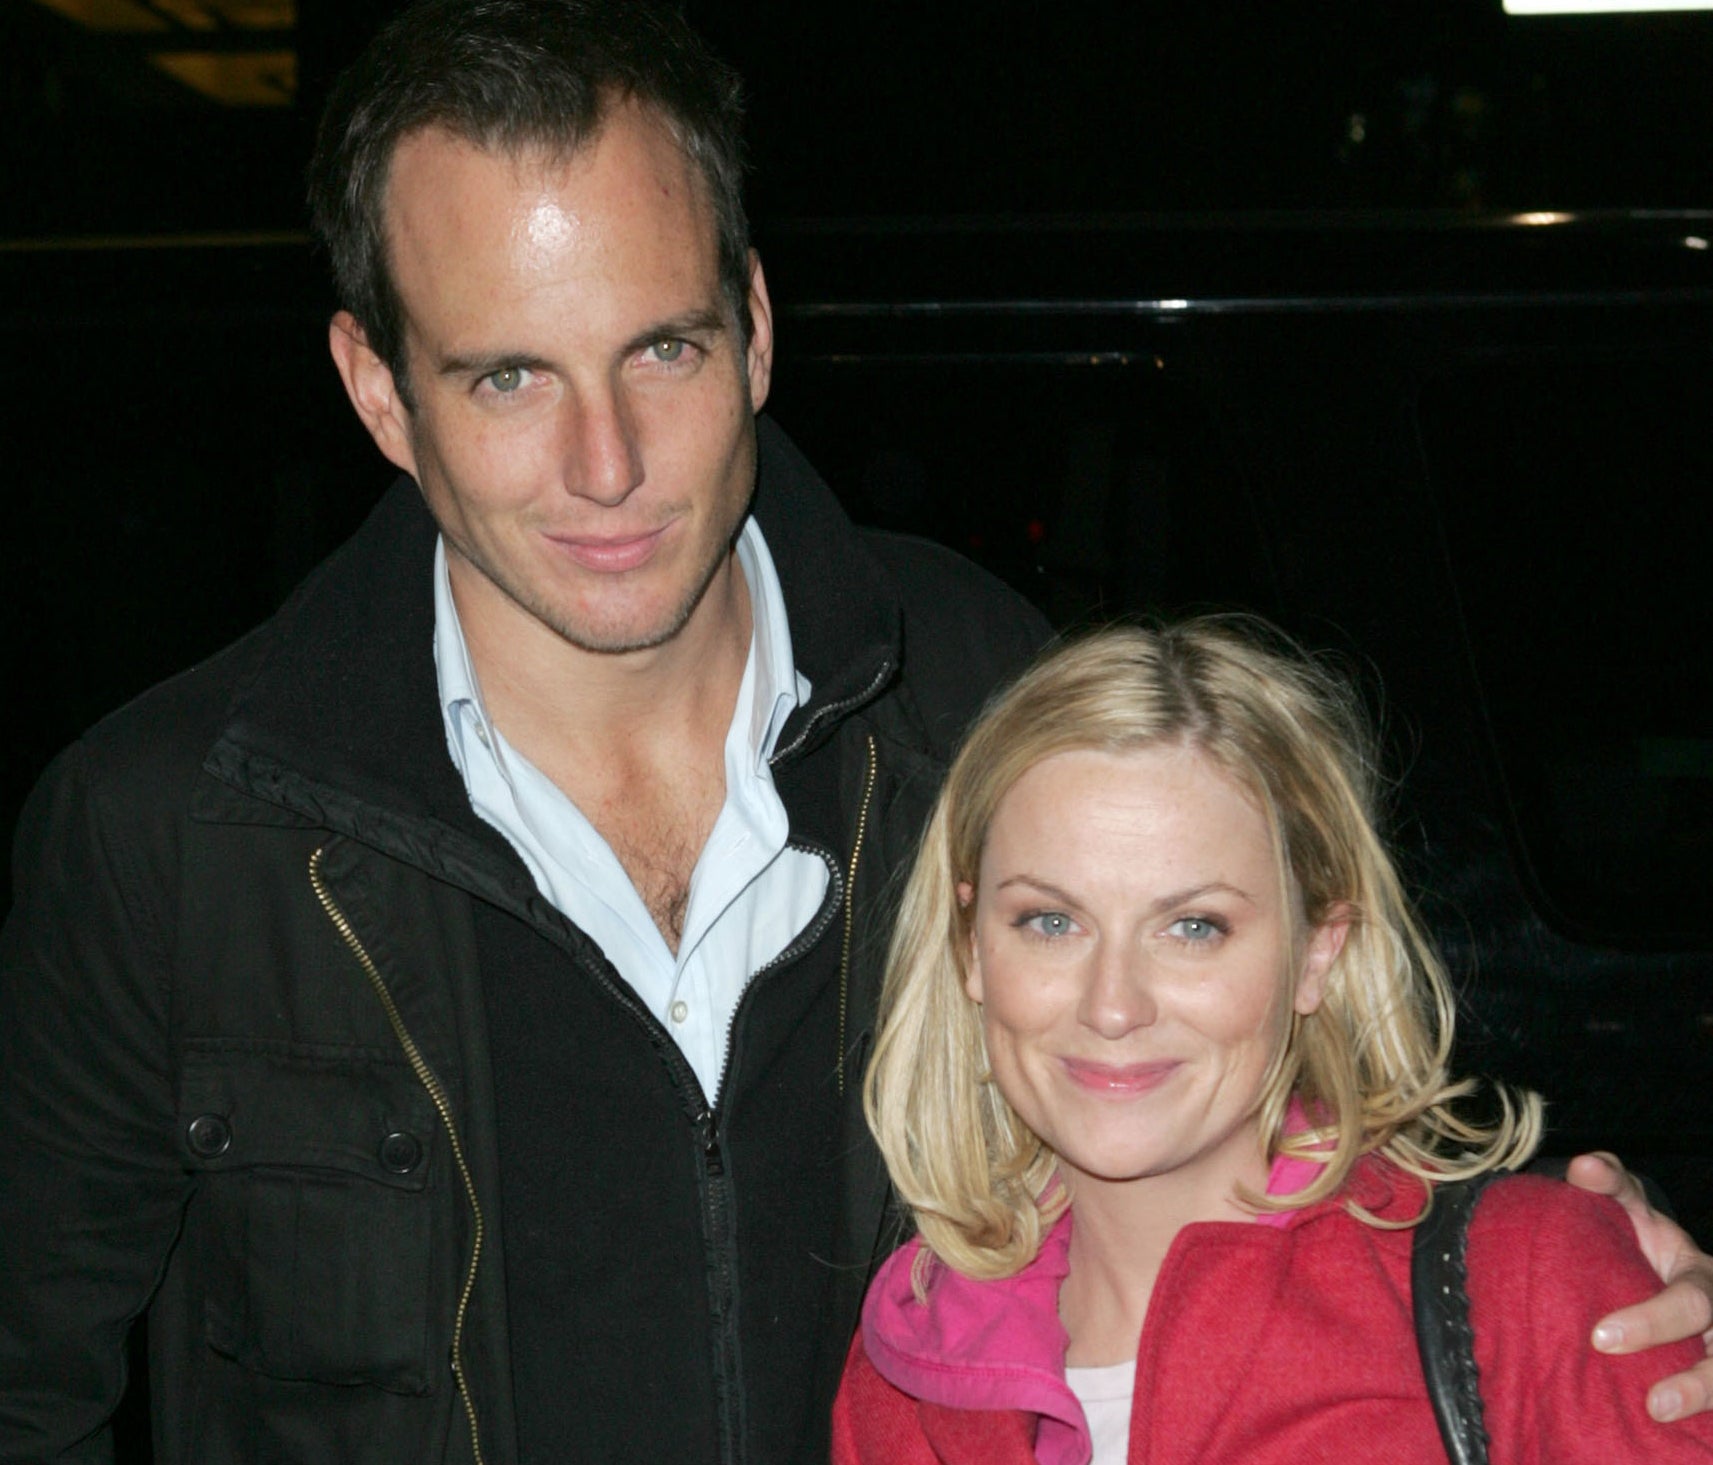 Amy Poehler and Will Arnett smiling together